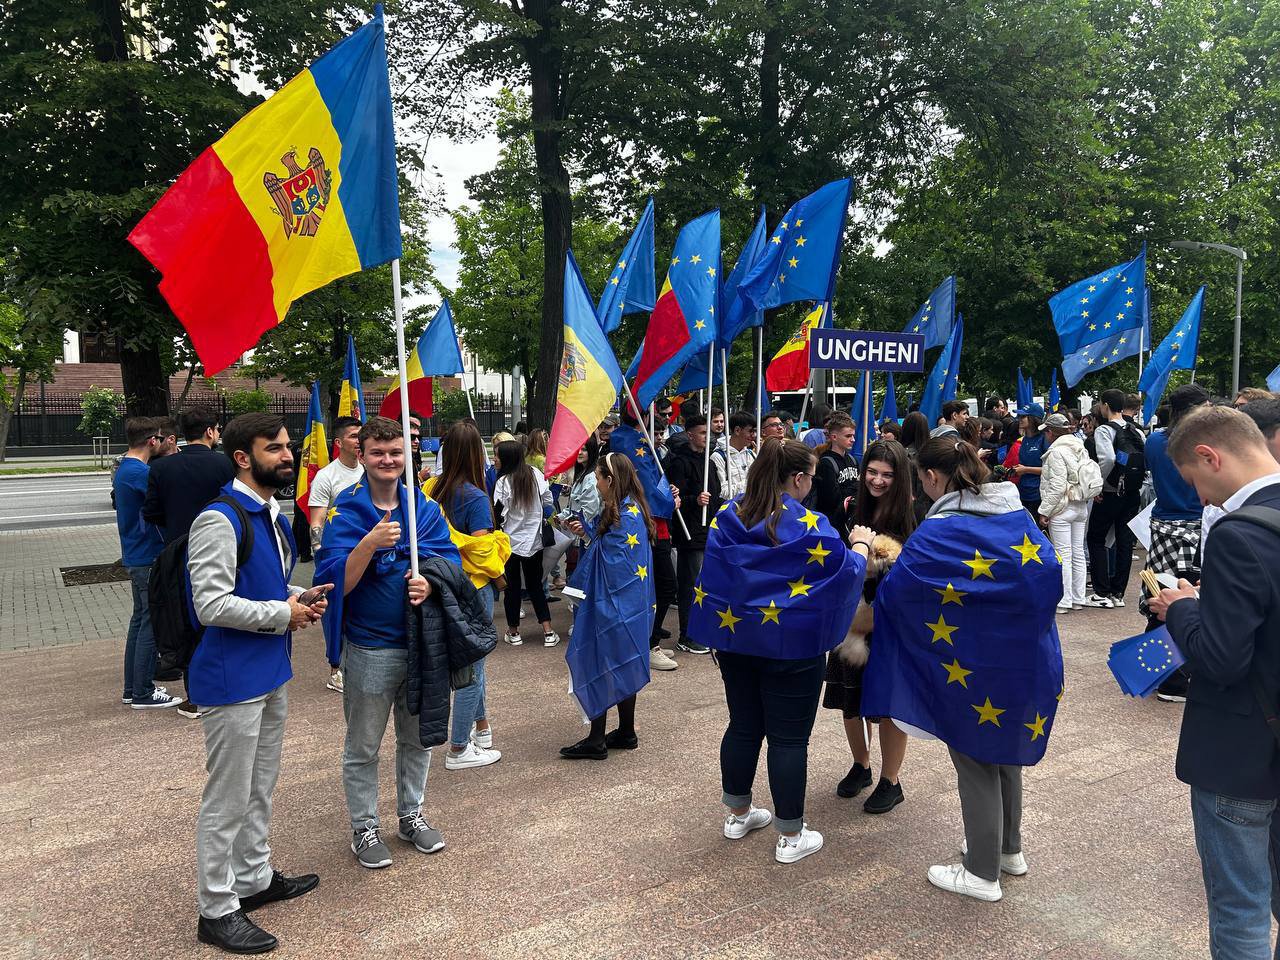 "Ole, ole, Moldova in the EU". March in support of the country's accession to the community block, in Chisinau